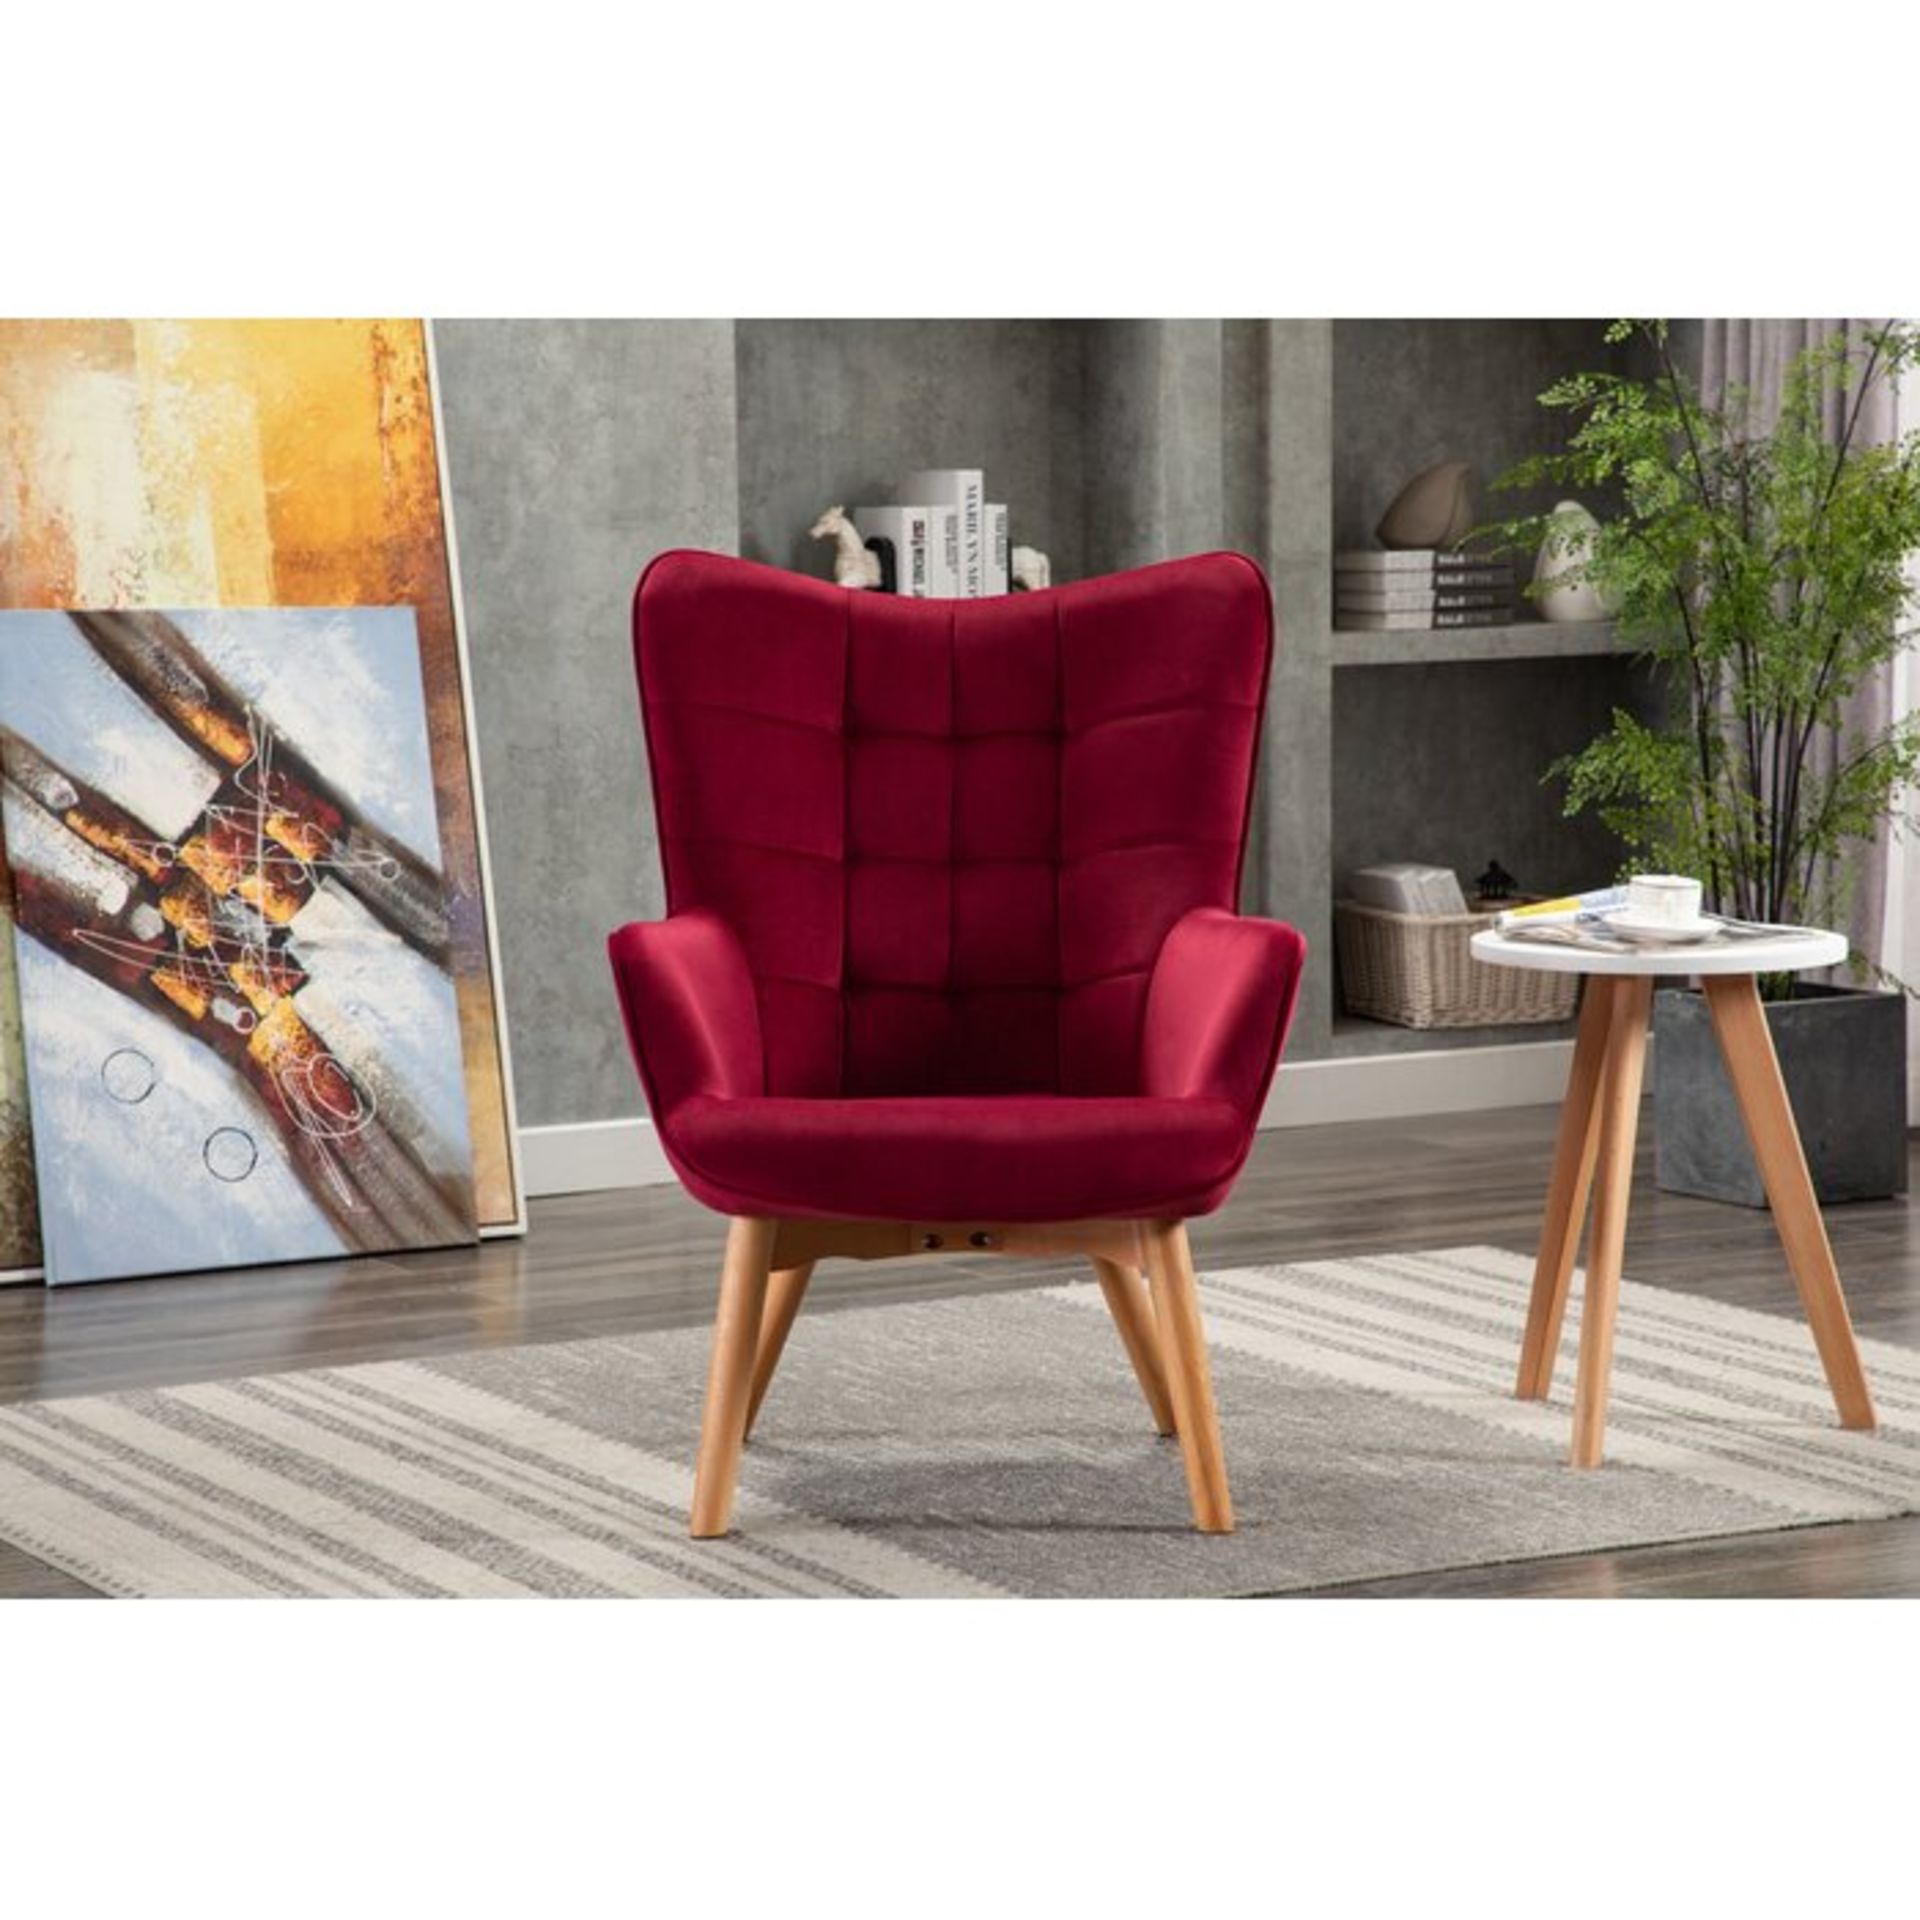 Helzer Lounge Chair - RRP £215.99